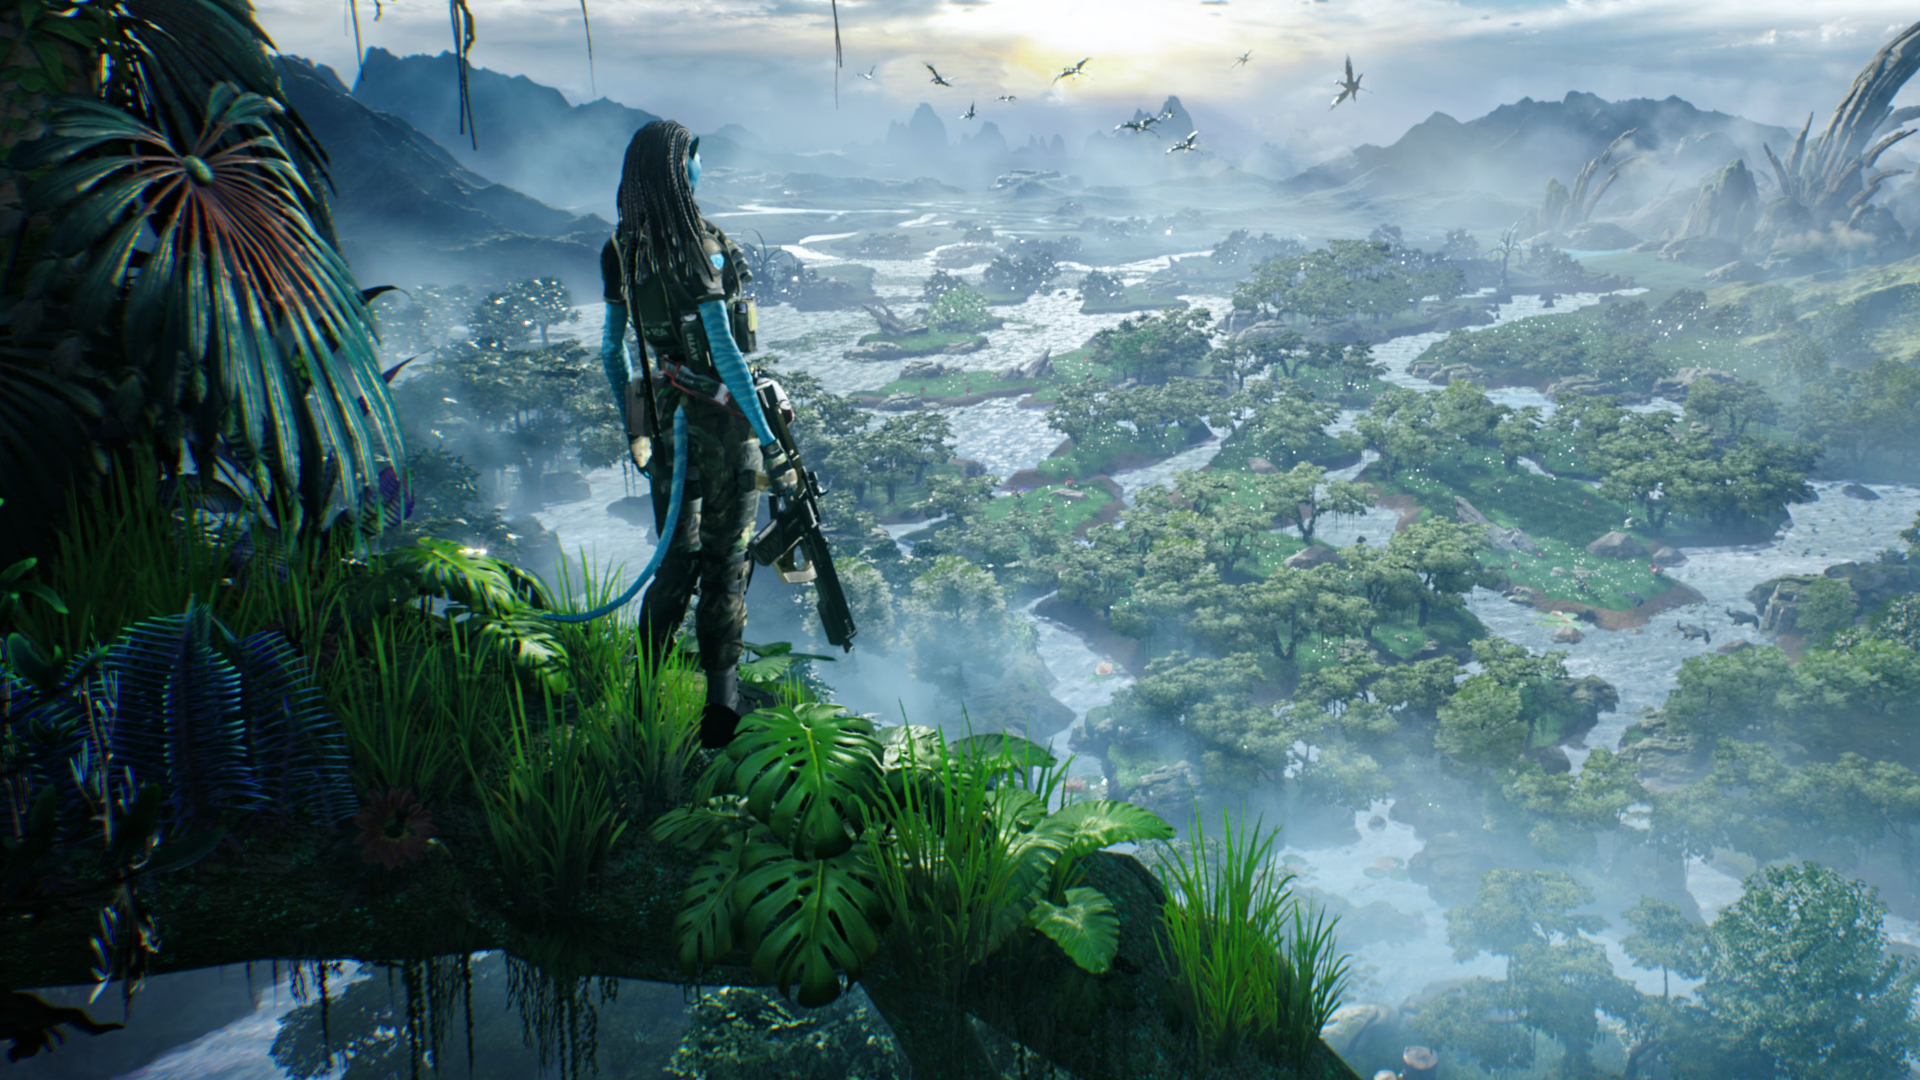 Avatar Frontiers of Pandora aims to mix Ubisofts open worlds with James  Camerons sustainability  Eurogamernet